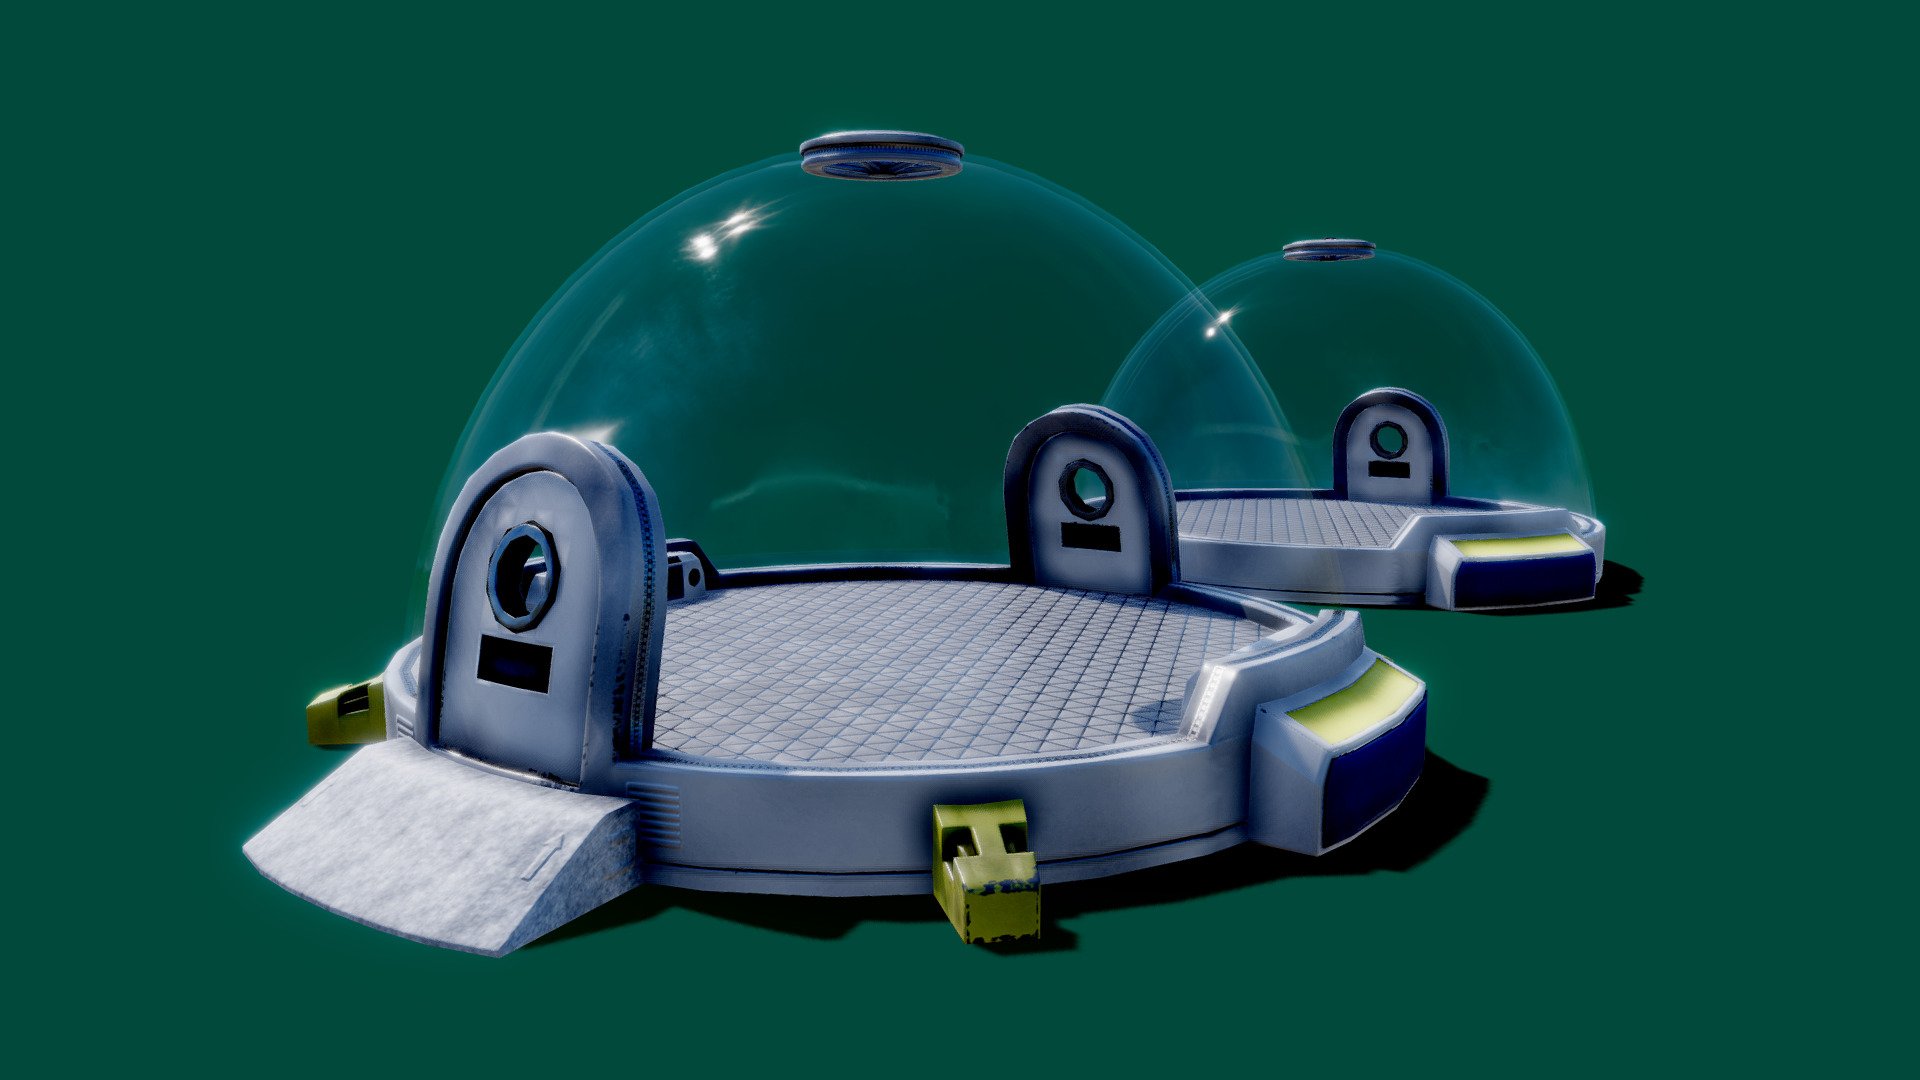 hello, i made Bubble Glass Arena/House Game Asset. Might good for your scene or game.

also i have free stuff for download please cek my page account, and follow for future upload.

Pack:
*  2 base object
*  1 door
*  1 propeler

in collaboration with Monqo Studio please check our store:




Unreal Marketplace &ndash; https://bit.ly/2K1U4ai

Unity Marketplace &ndash; https://bit.ly/2BGz2dT

looking for freelance 3D artist for your mobile game? Feel free to ask me by email feral.fe2@gmail.com

oh… if you want, i post several progress in my instagram @ferozes

And check out my game on googleplay FULL FREE NO ADS —&gt; https://bit.ly/2FRlptH If you can reach level 17++ Mention me on twitter @Frandez0 XD

thank you for supporting me, have nice scene :D - Bubble Glass Arena/House Game Asset - Buy Royalty Free 3D model by ferofluid 3d model